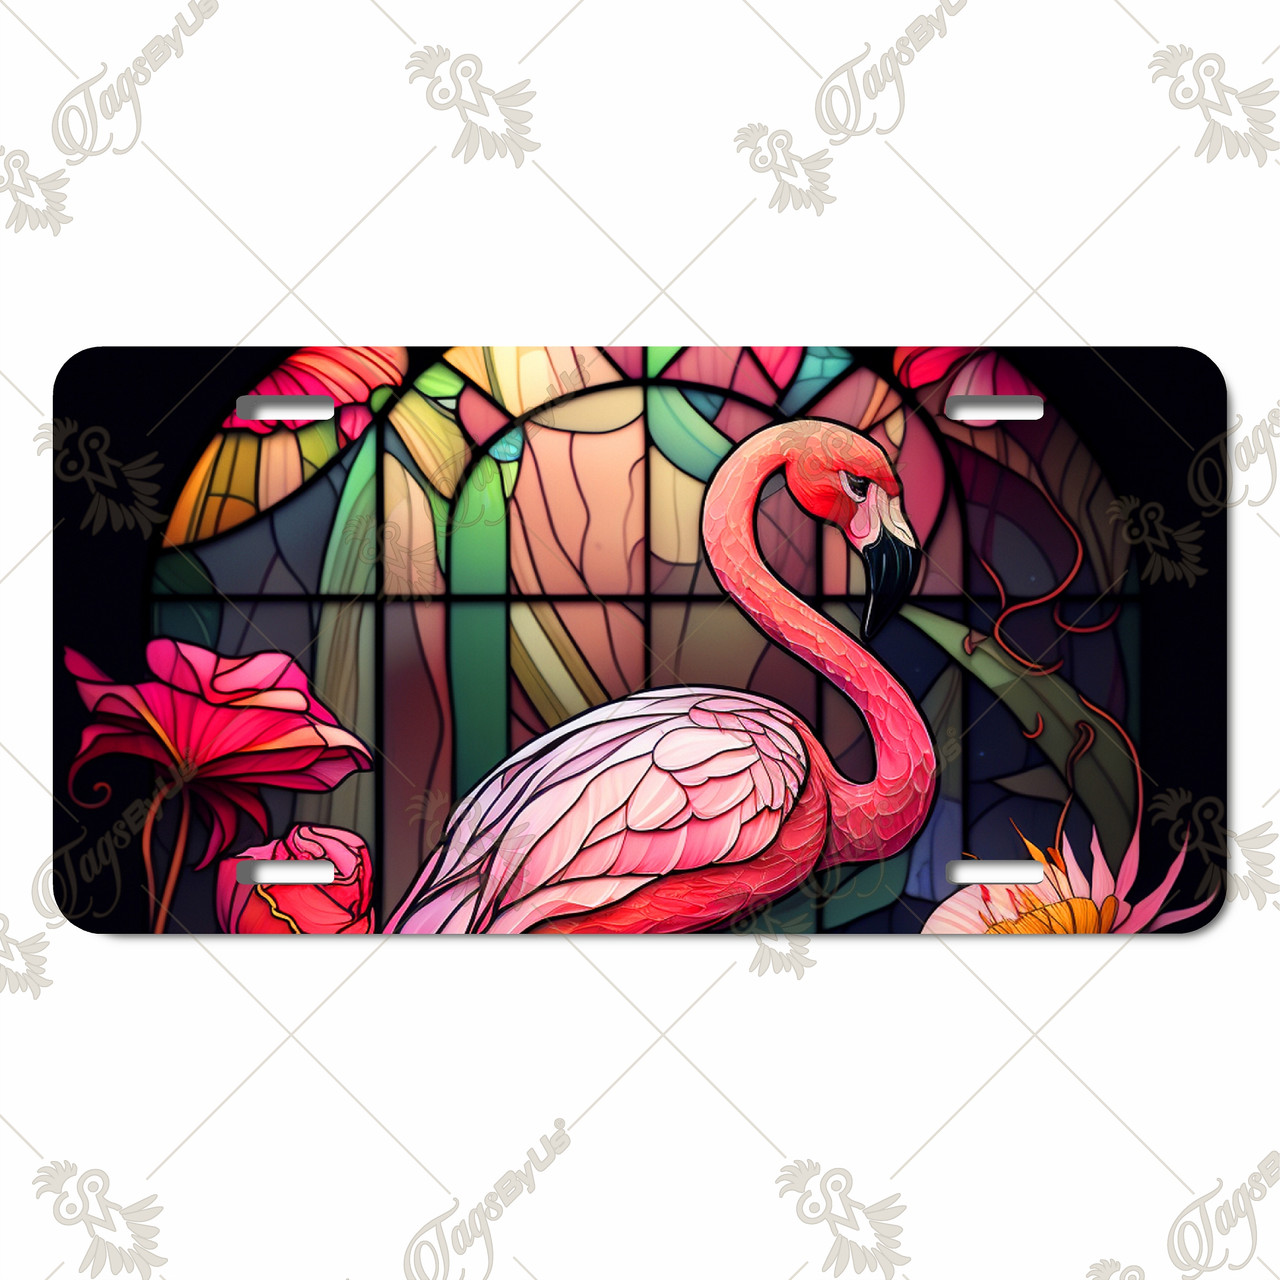 Flamingo on stained Glass license plate - Flamingo car tag